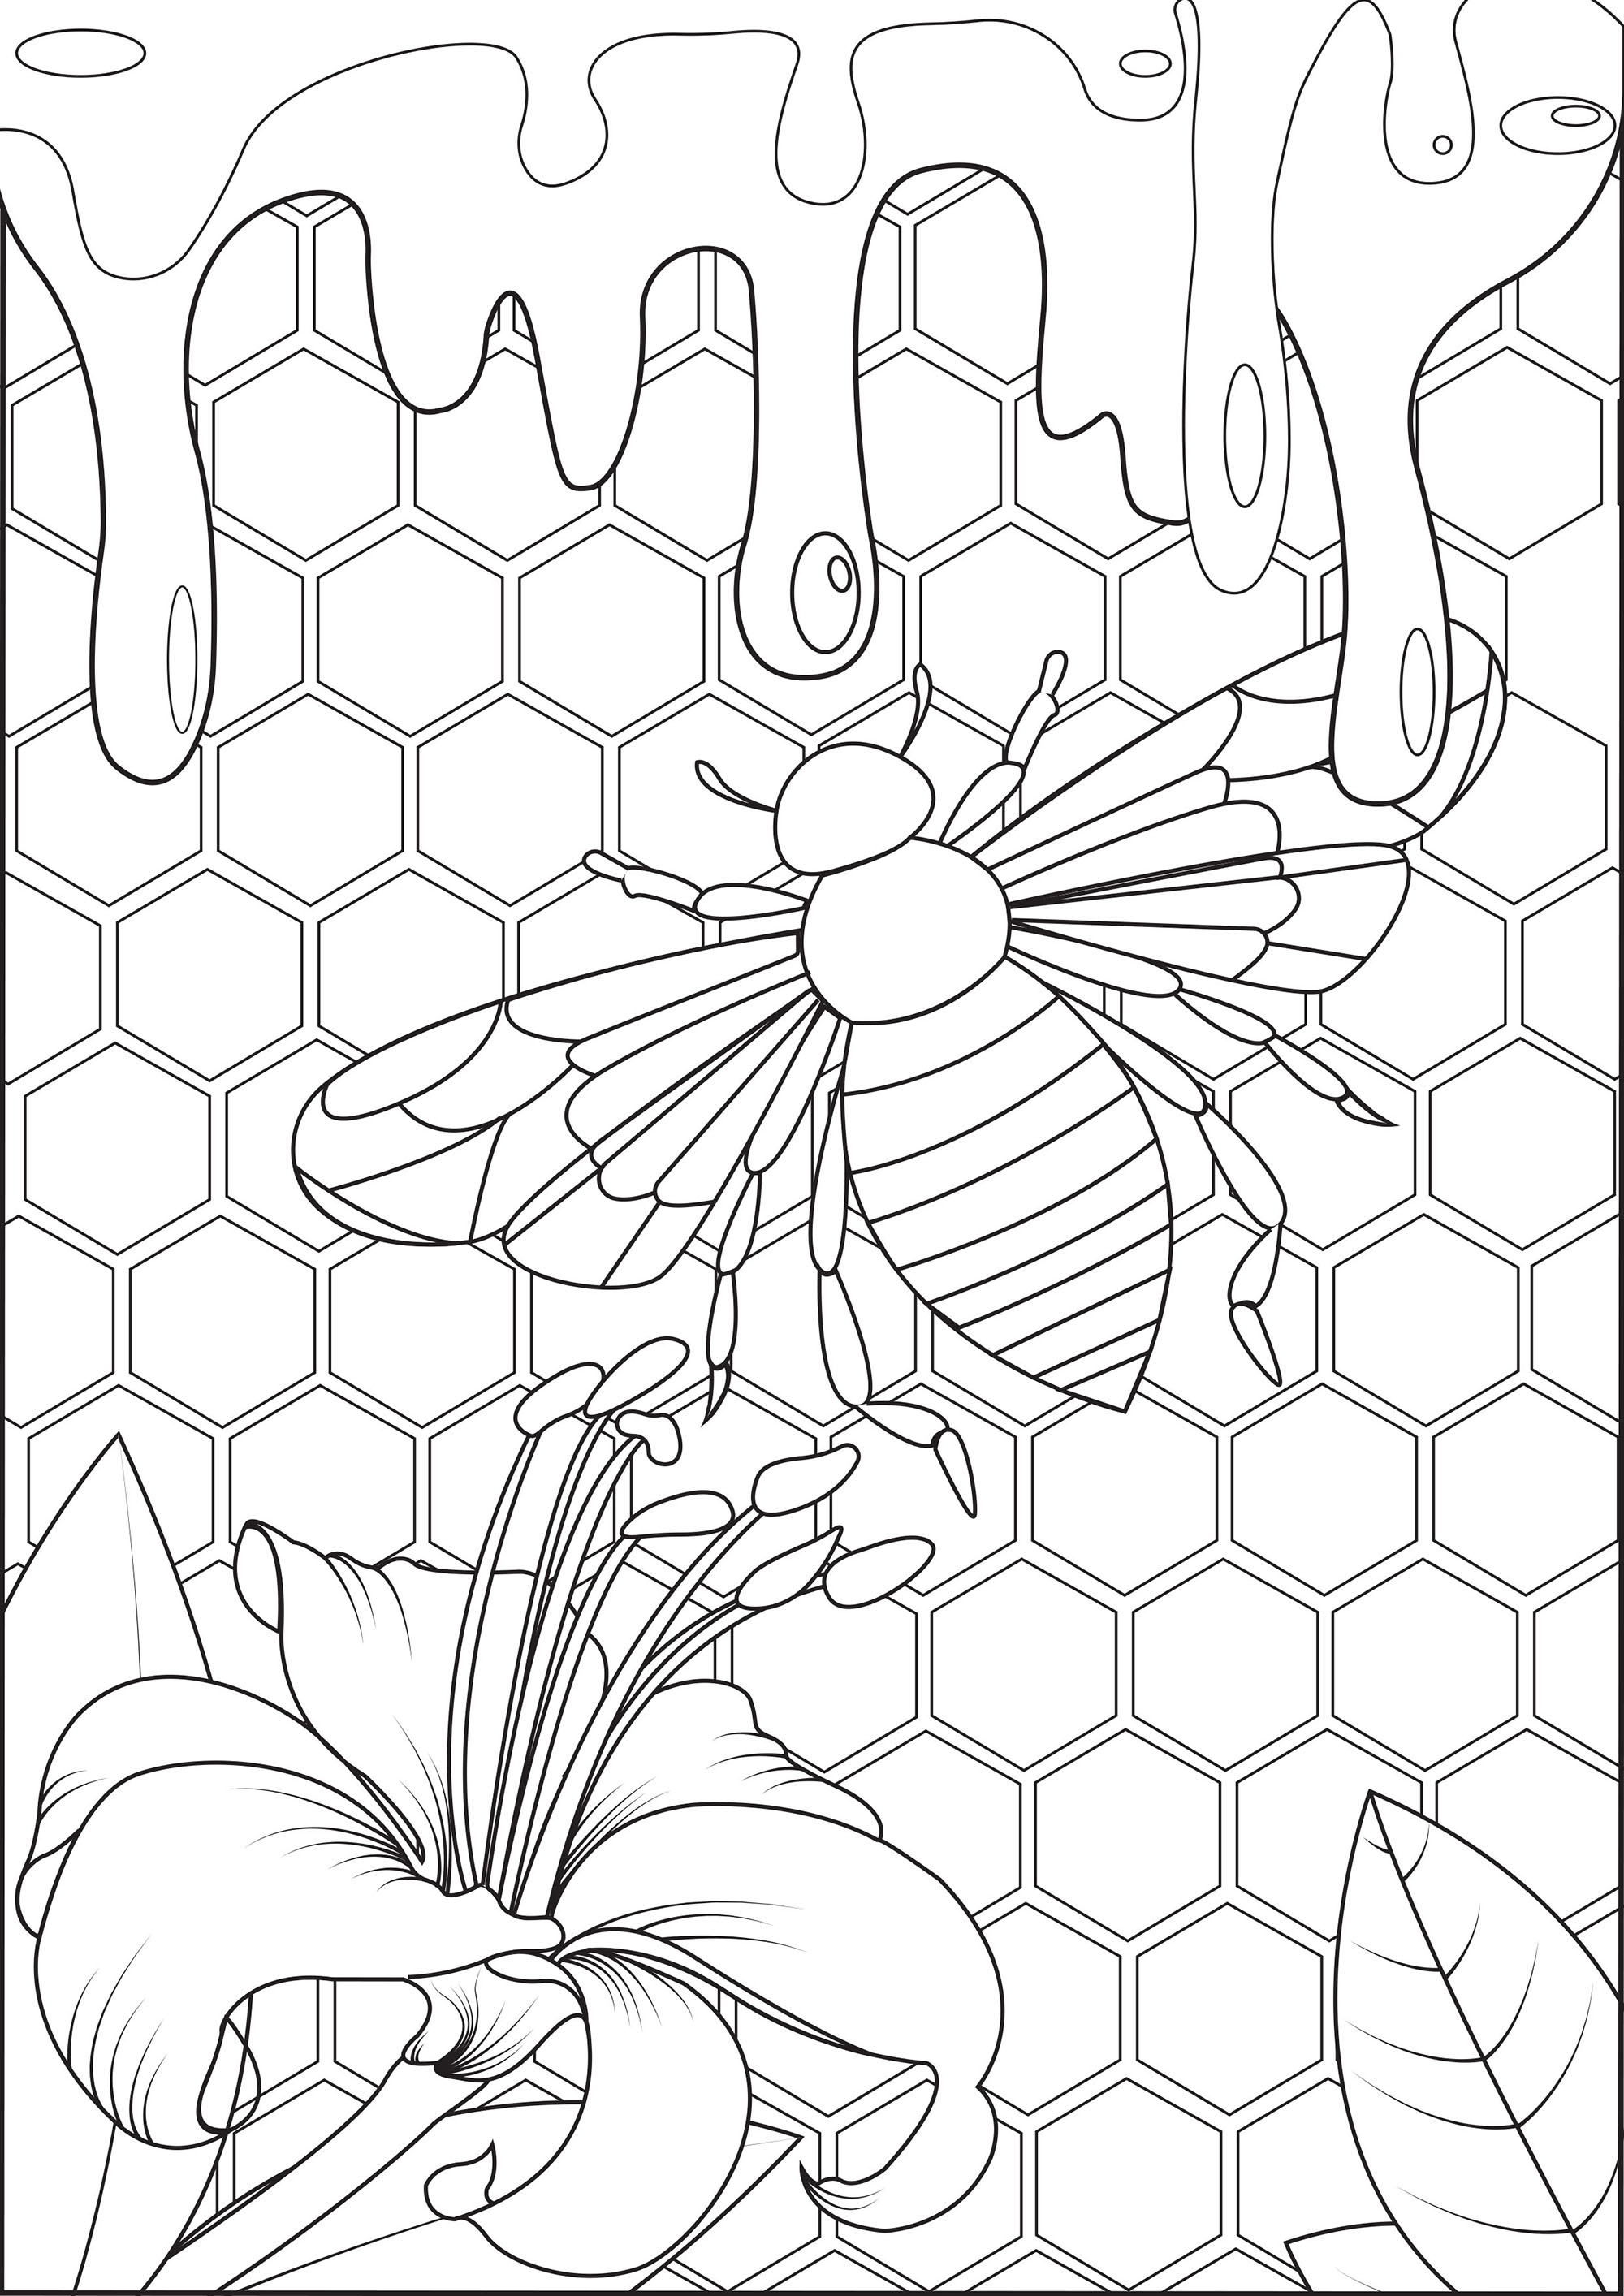 Bee and honey - Butterflies & insects Adult Coloring Pages